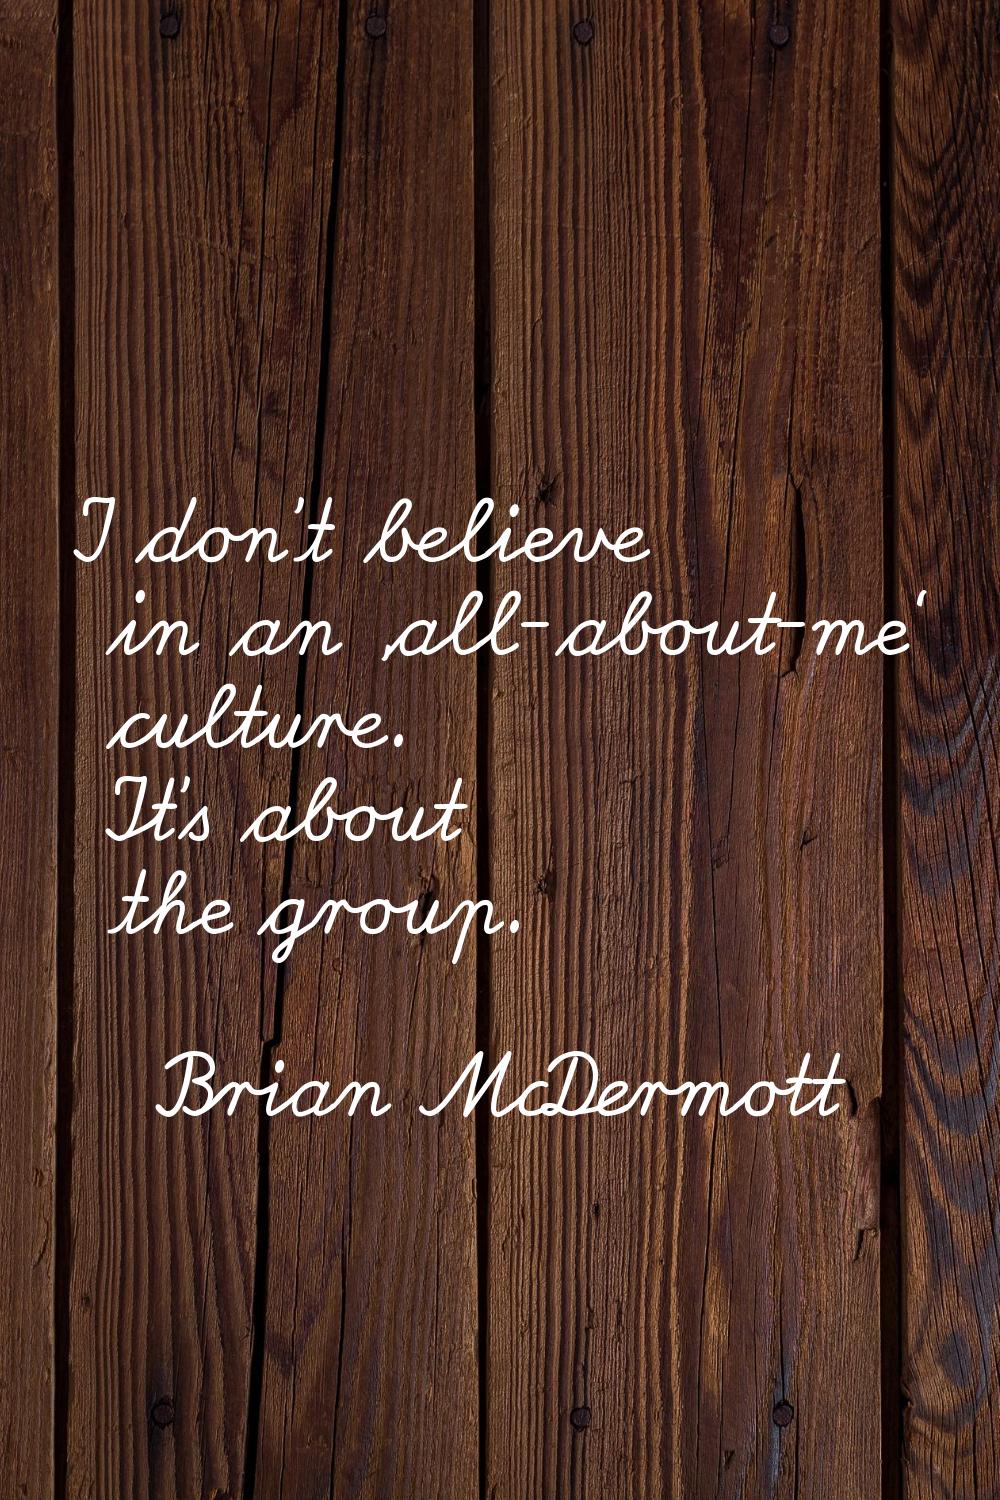 I don't believe in an 'all-about-me' culture. It's about the group.